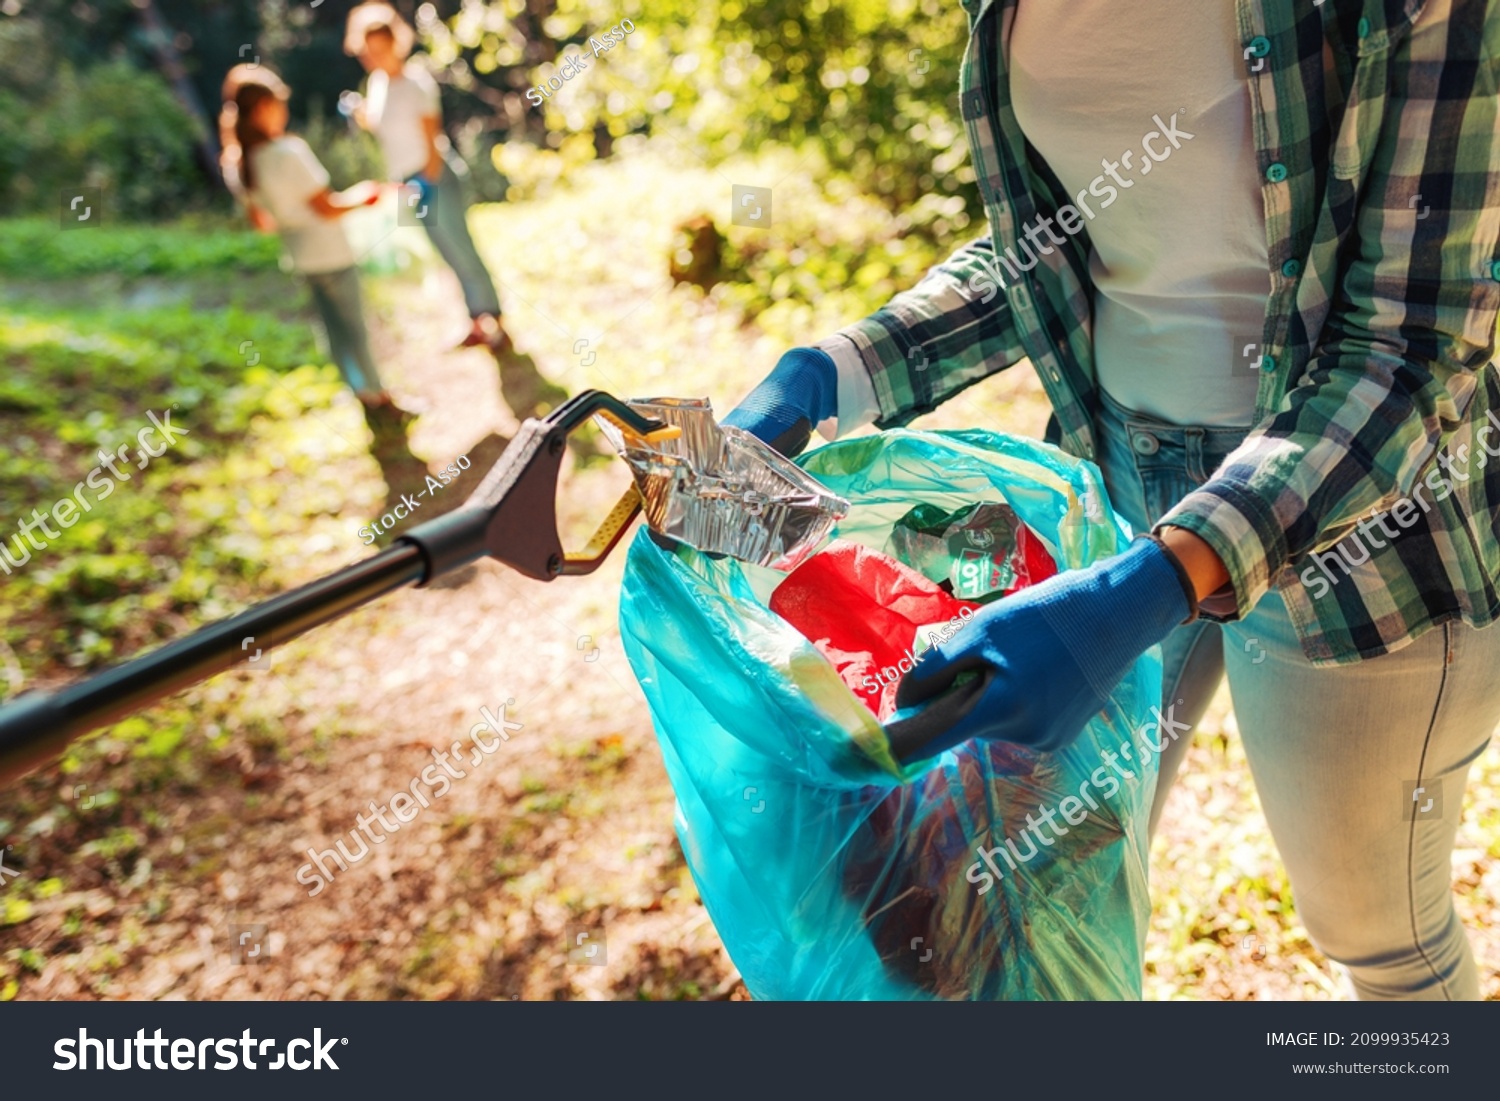 Volunteers cleaning up the park, a woman is putting trash in a garbage bag and some kids are helping her, environmental protection concept #2099935423